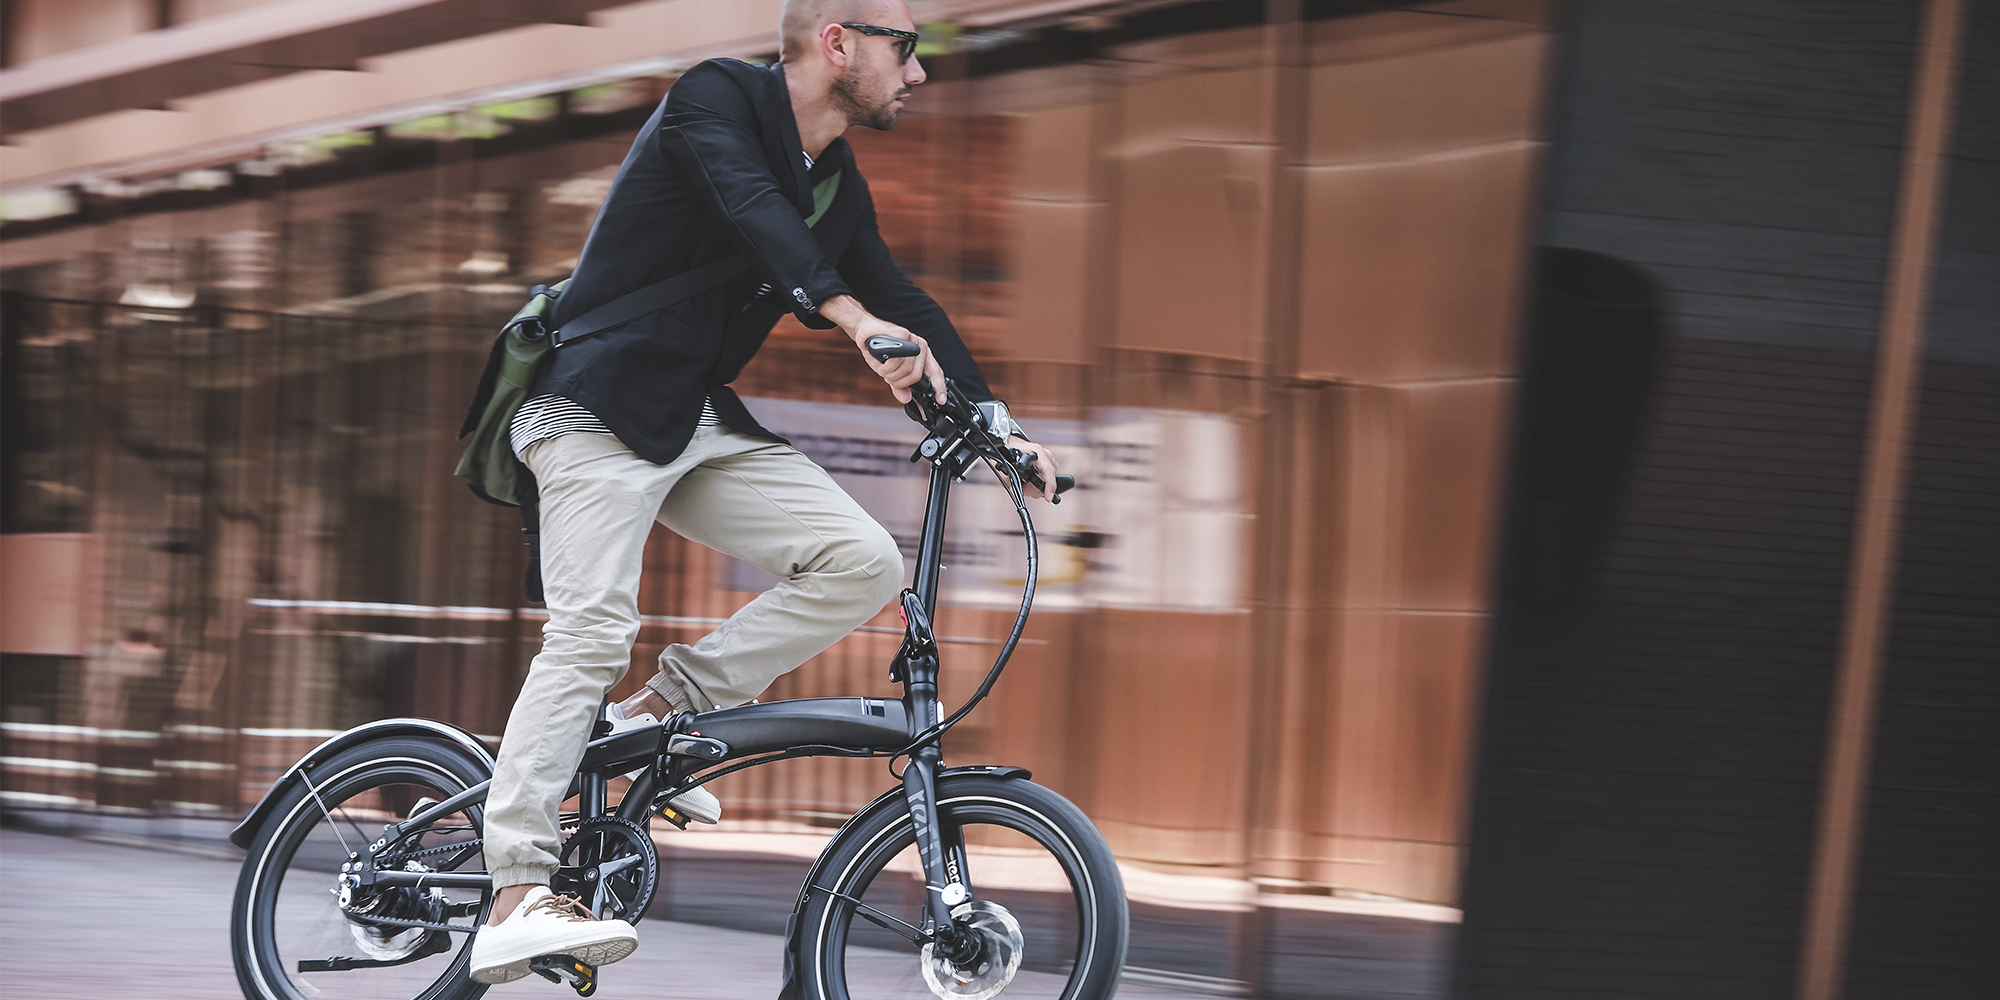 Tern Bicycles Built for Speed